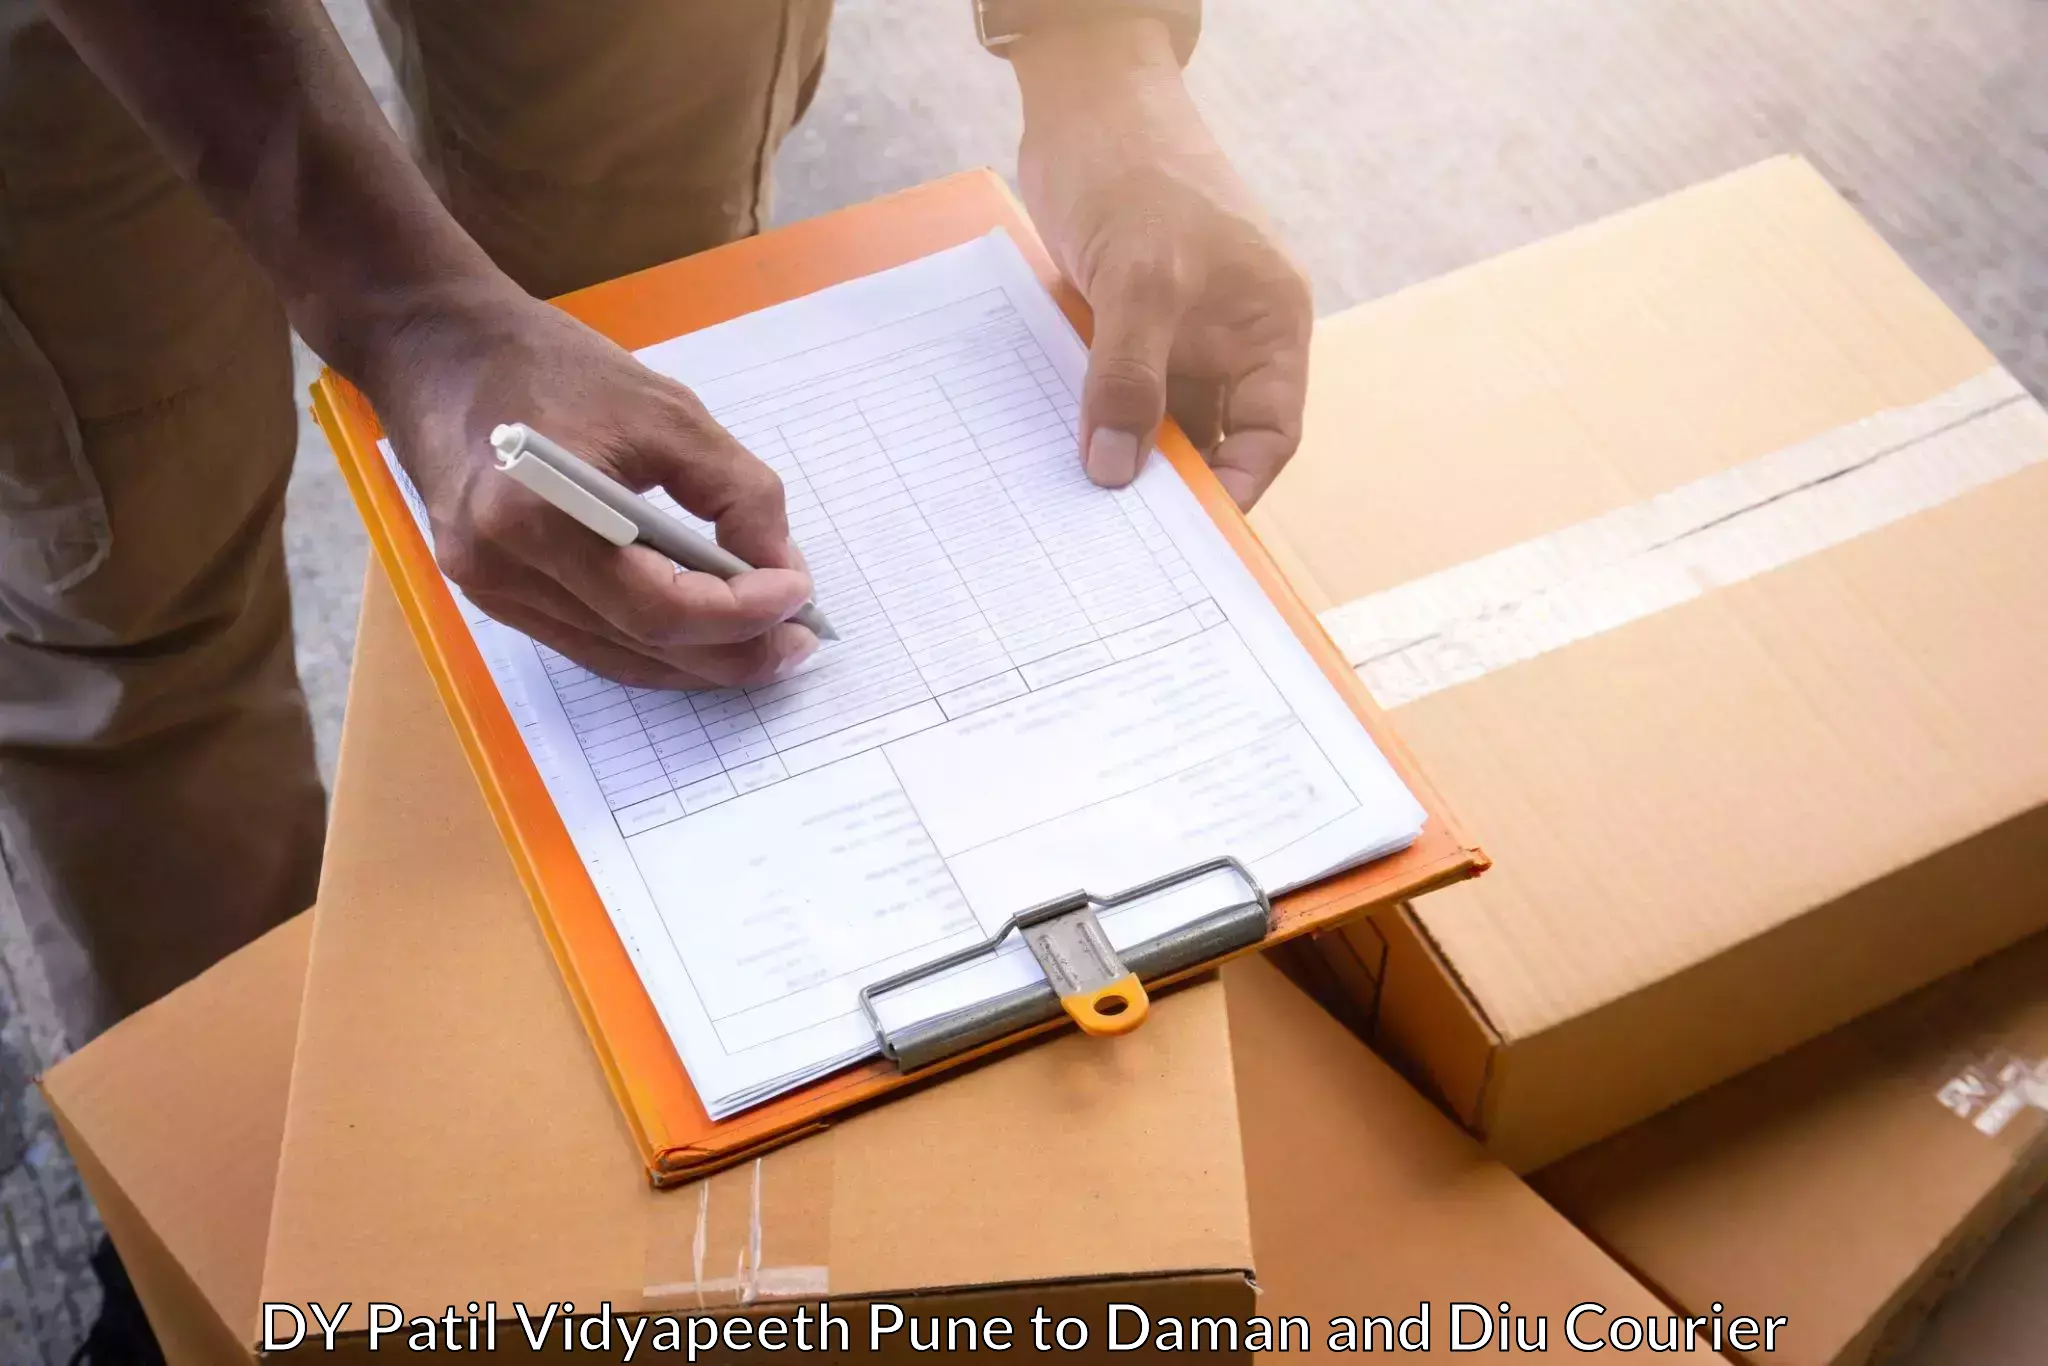 Supply chain delivery DY Patil Vidyapeeth Pune to Daman and Diu